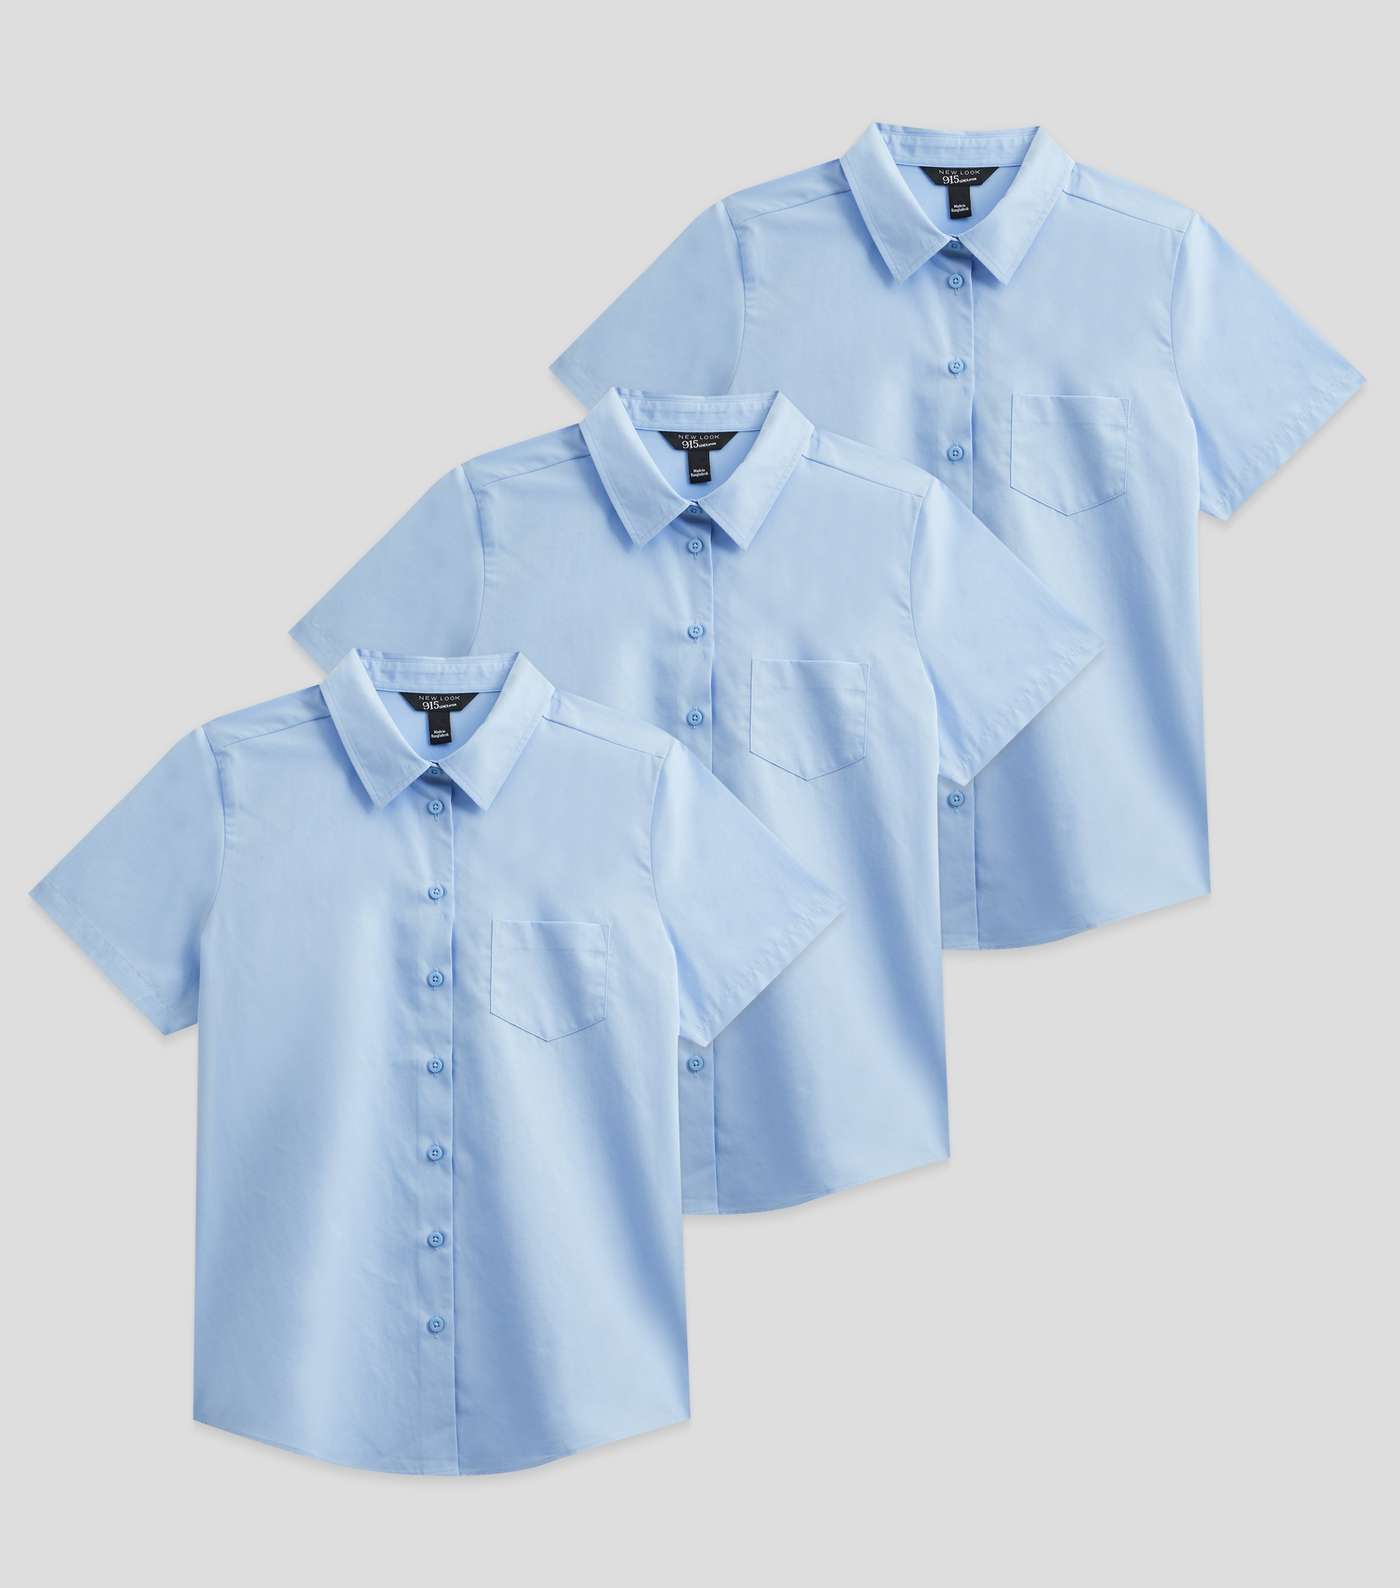 Girls 3 Pack Pale Blue Short Sleeve Collared Easy Care School Shirts Image 5